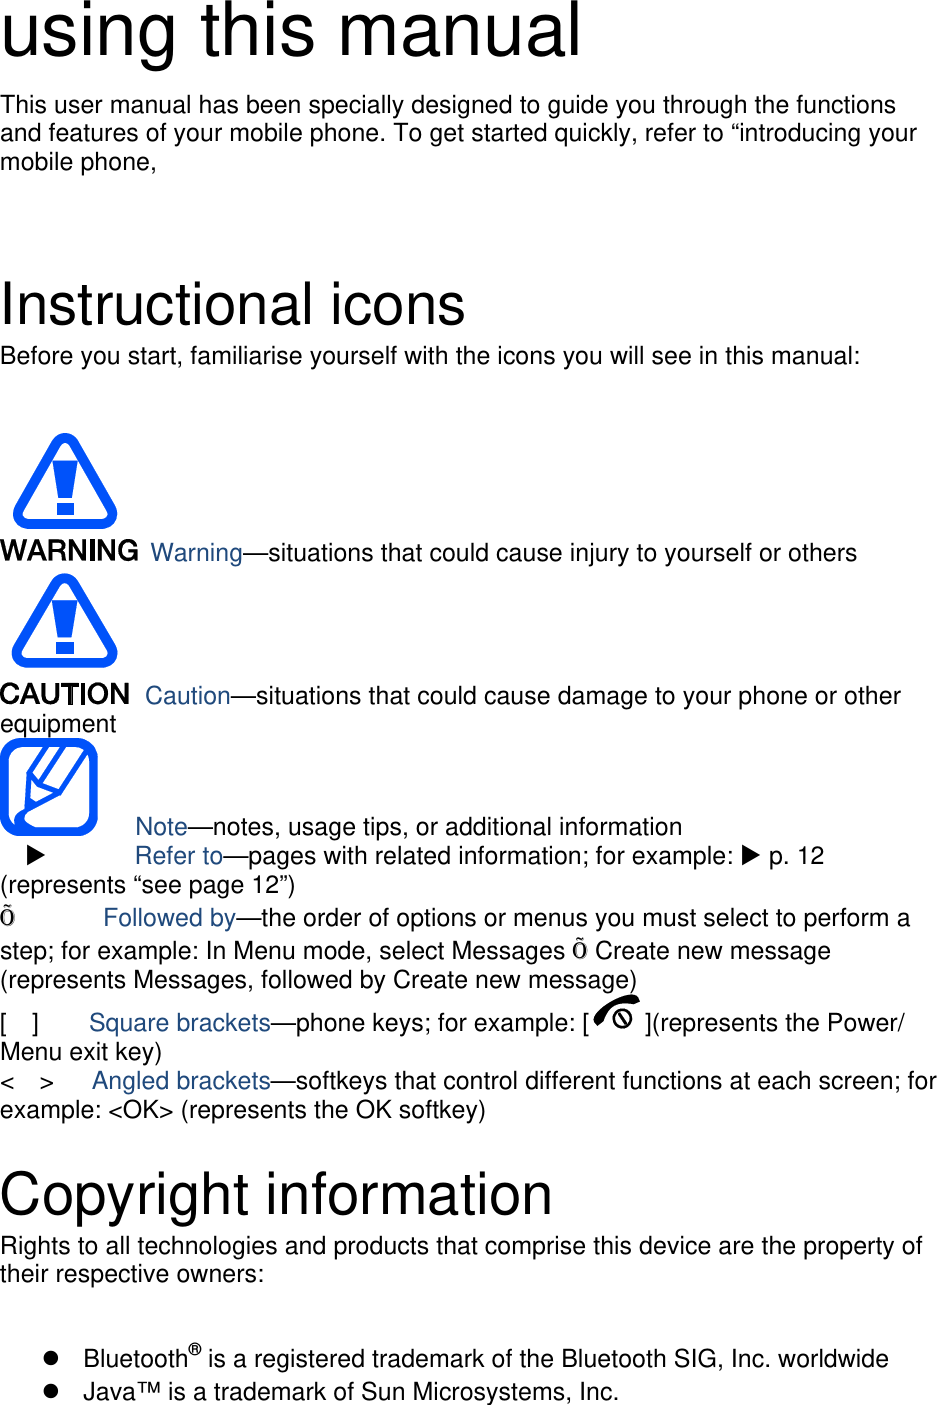 using this manual This user manual has been specially designed to guide you through the functions and features of your mobile phone. To get started quickly, refer to “introducing your mobile phone,    Instructional icons Before you start, familiarise yourself with the icons you will see in this manual:     Warning—situations that could cause injury to yourself or others  Caution—situations that could cause damage to your phone or other equipment    Note—notes, usage tips, or additional information          Refer to—pages with related information; for example:  p. 12 (represents “see page 12”) Õ       Followed by—the order of options or menus you must select to perform a step; for example: In Menu mode, select Messages Õ Create new message (represents Messages, followed by Create new message) [  ]    Square brackets—phone keys; for example: [ ](represents the Power/ Menu exit key) &lt;  &gt;   Angled brackets—softkeys that control different functions at each screen; for example: &lt;OK&gt; (represents the OK softkey)  Copyright information Rights to all technologies and products that comprise this device are the property of their respective owners:   Bluetooth® is a registered trademark of the Bluetooth SIG, Inc. worldwide   Java™ is a trademark of Sun Microsystems, Inc. 